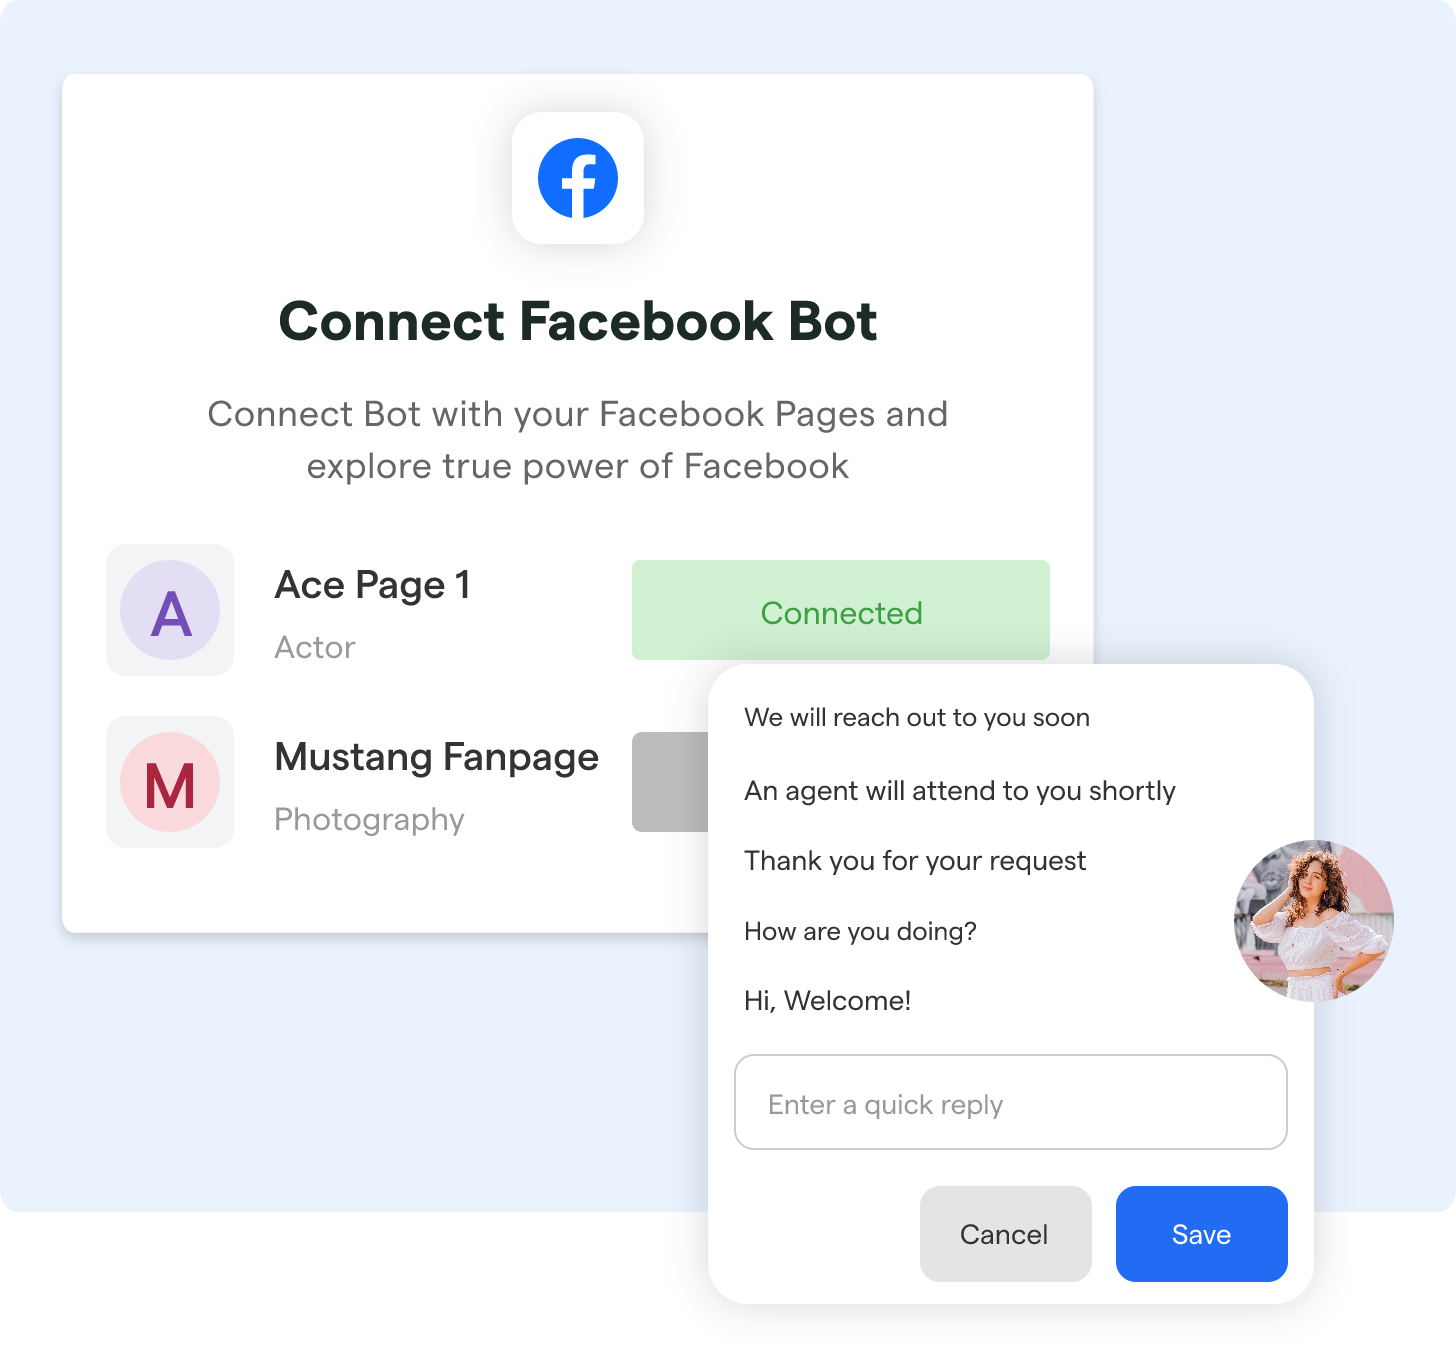 How to implement a successful Facebook chatbot?